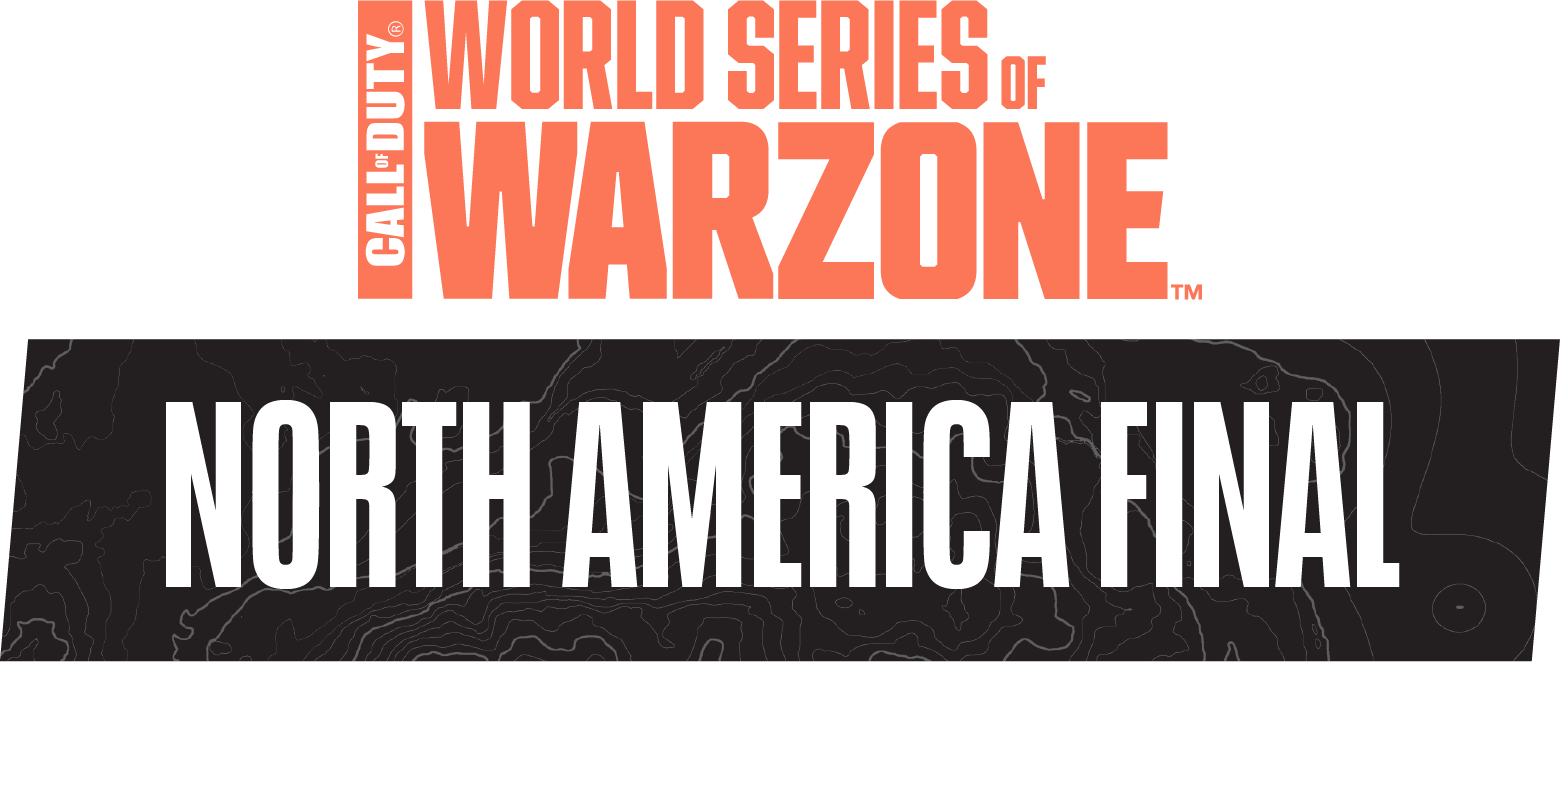 Call of Duty World Series of Warzone